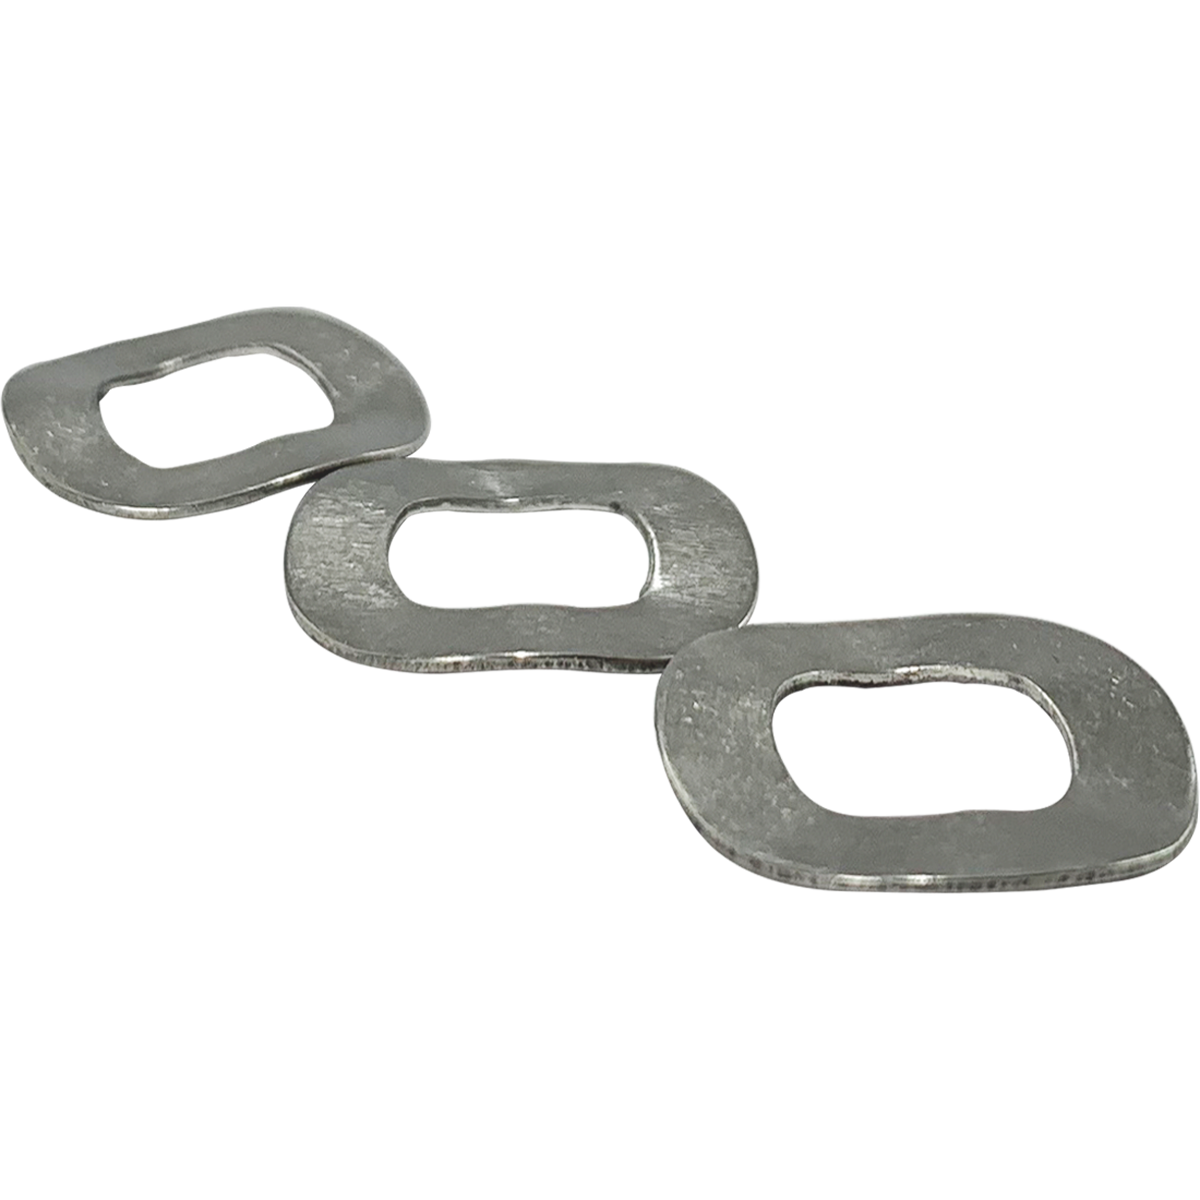 Corrosion resistant, Crinkle Washers. A washer with a crinkled appearance that adds tension when tightened with a nut or bolt and helps strengthen the fixing.